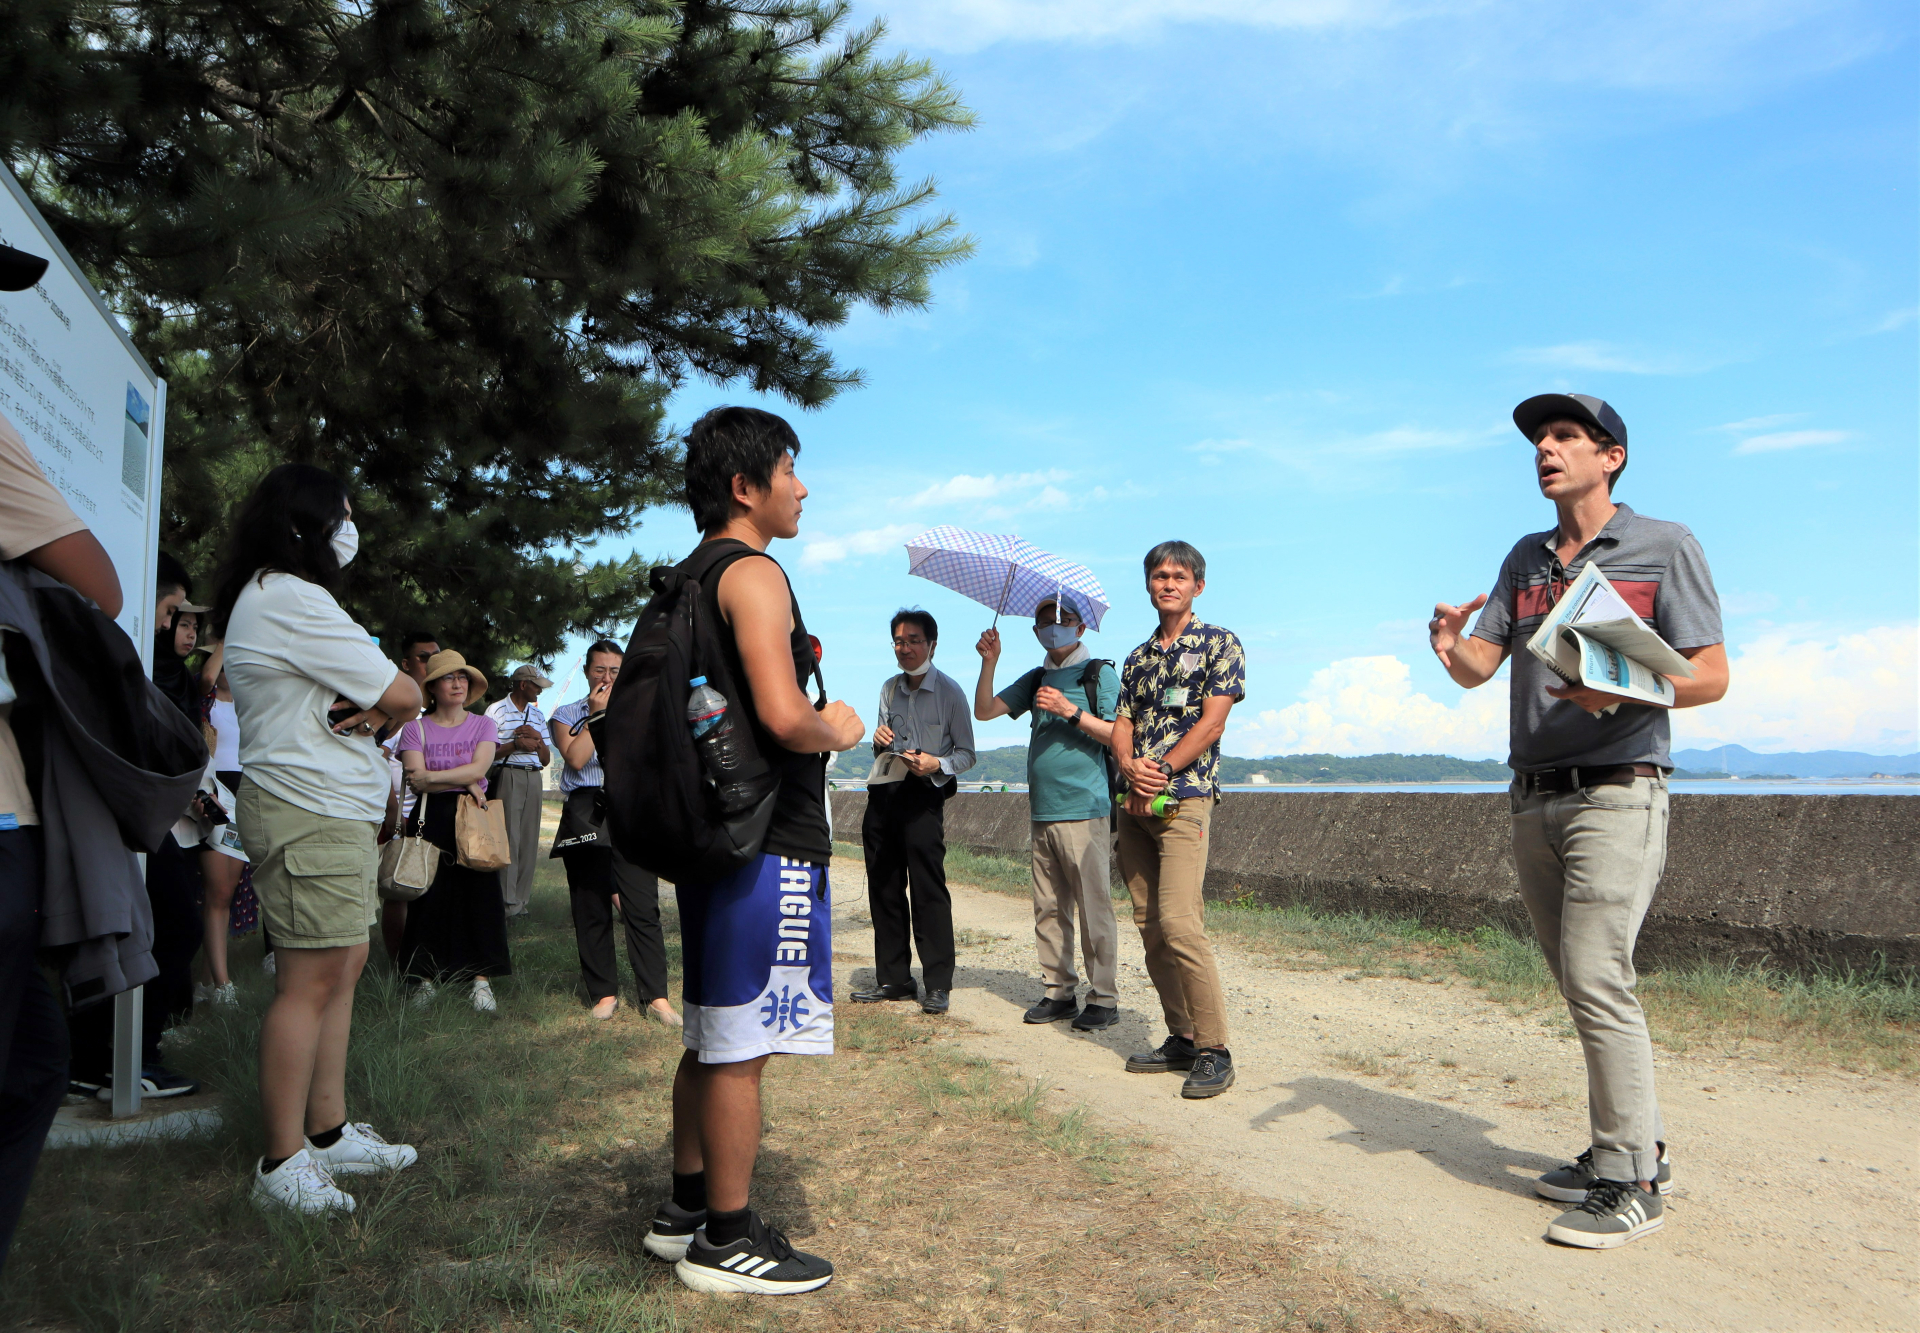 At Akitsu Bay, Dr. Fisher reflects with students about the relationship between ocean sustainability and oyster farming.